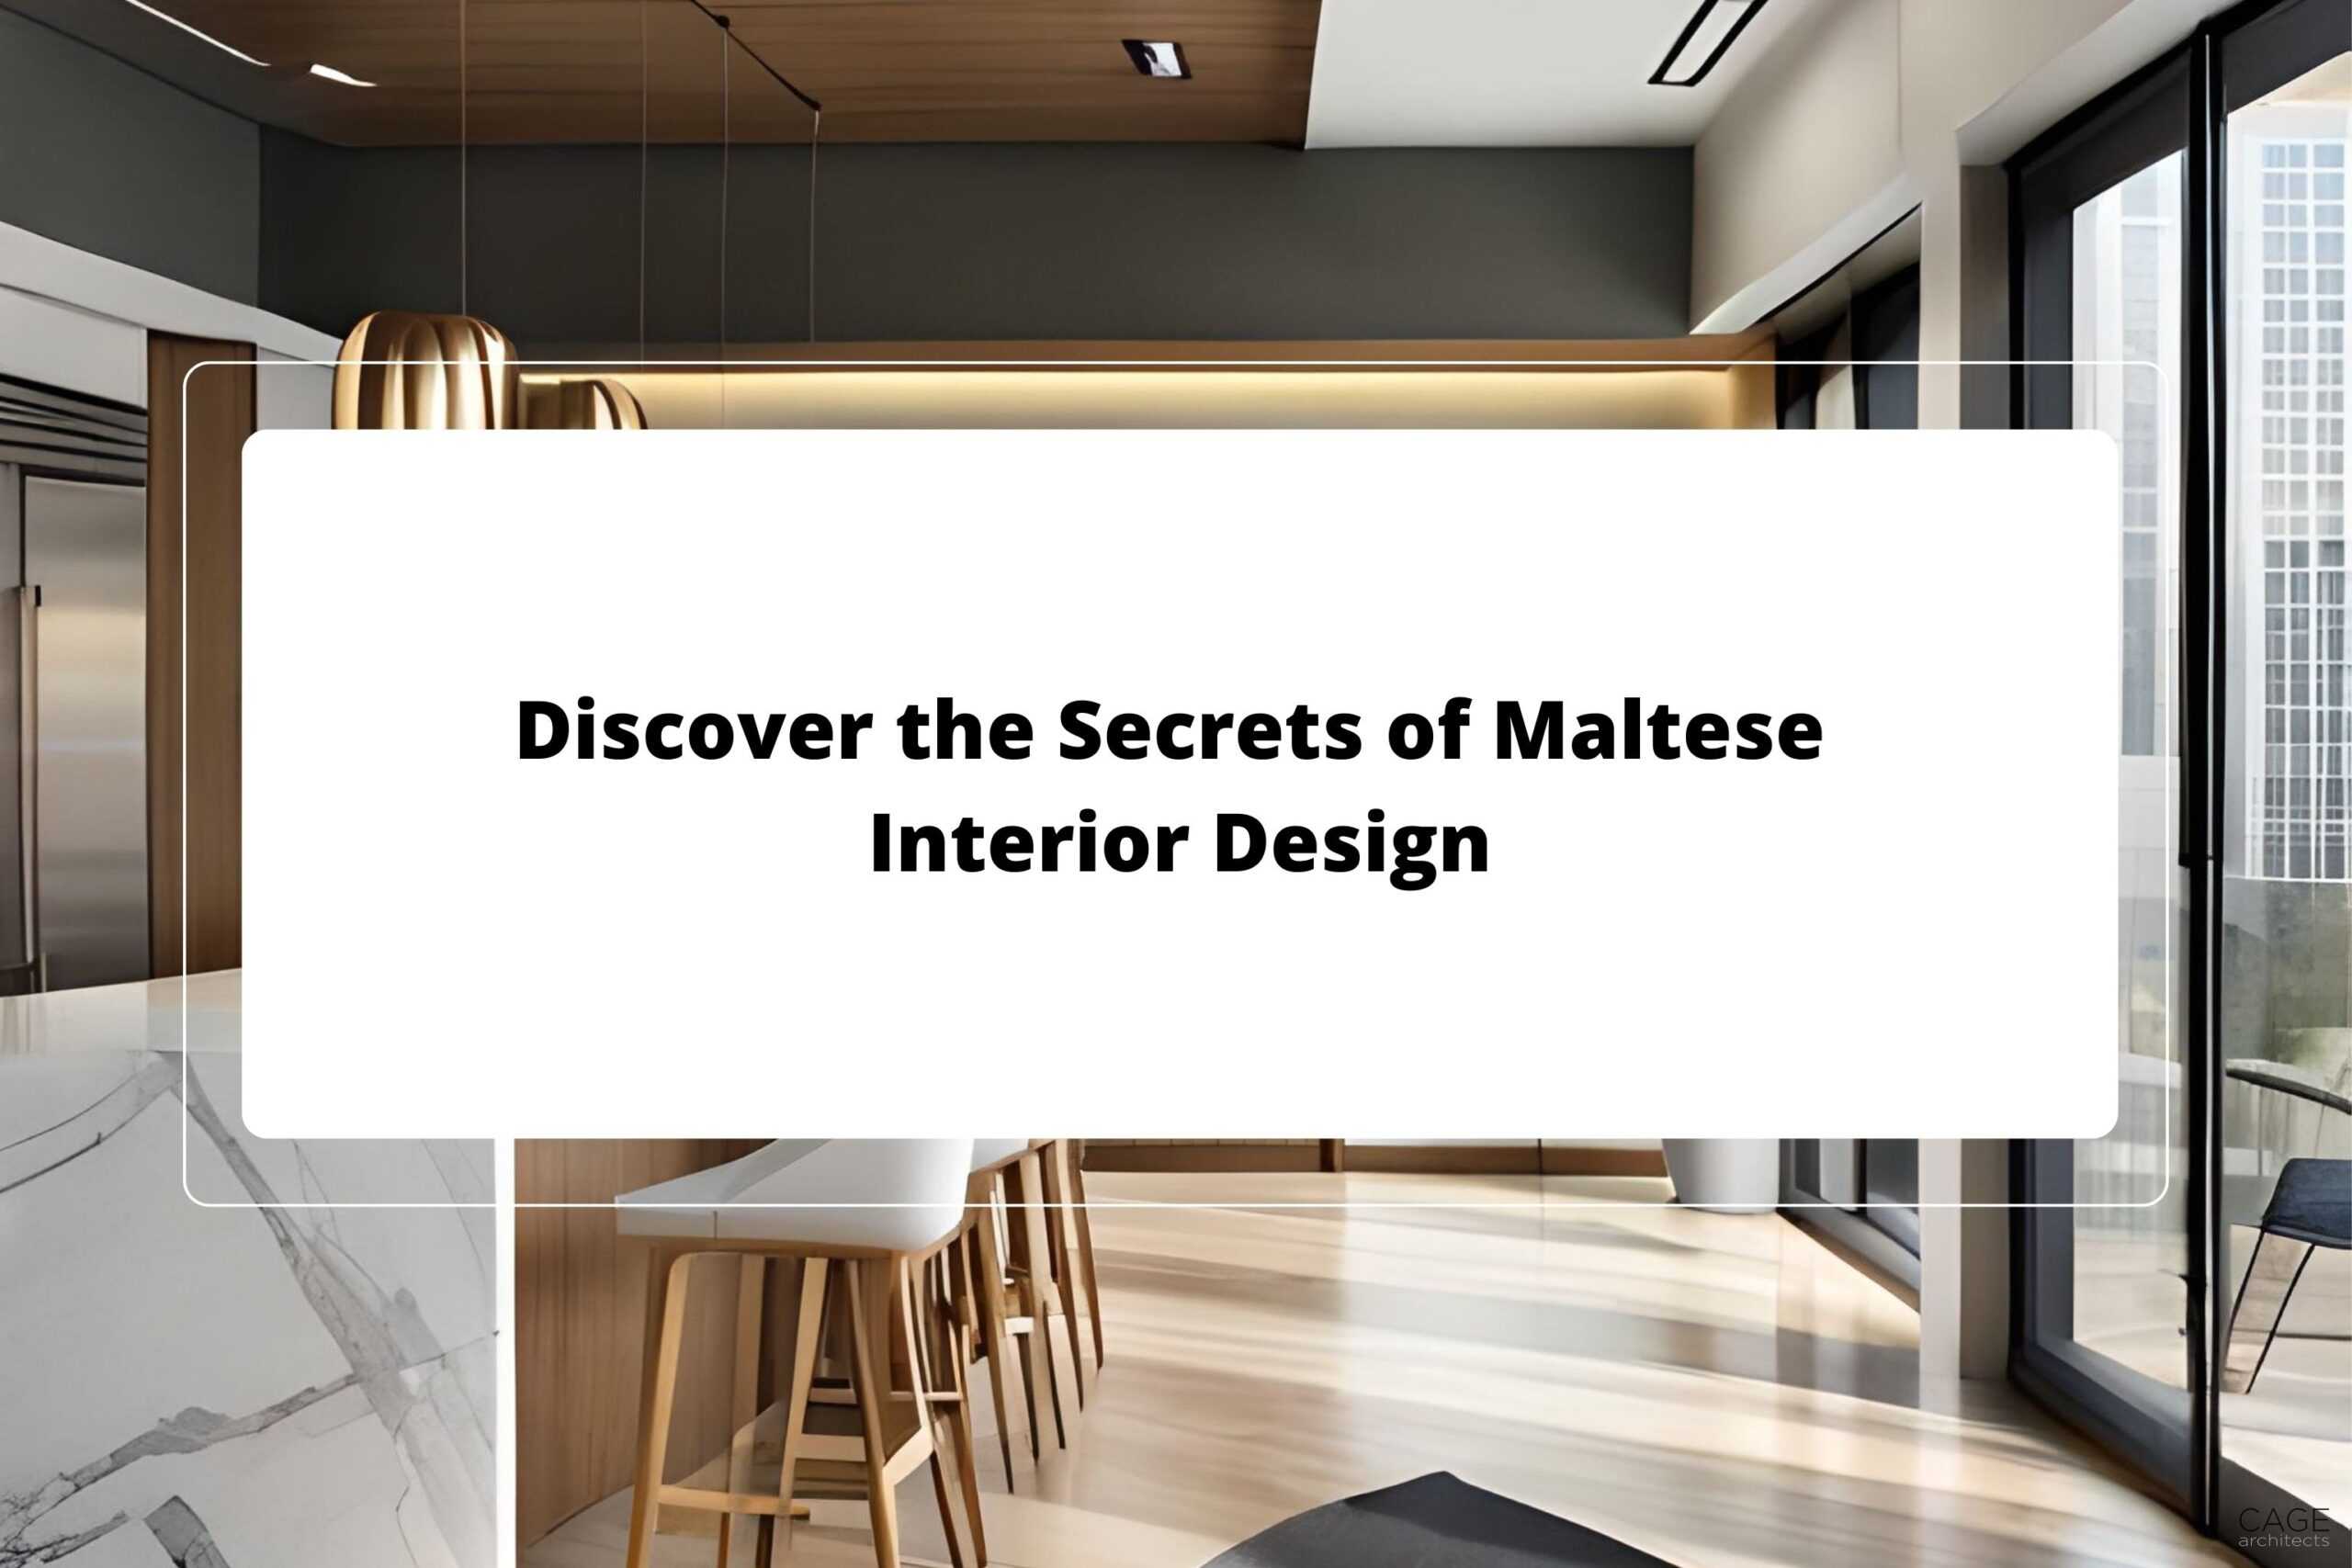 Discover the Secrets of Maltese Interior Design with CAGE Architects